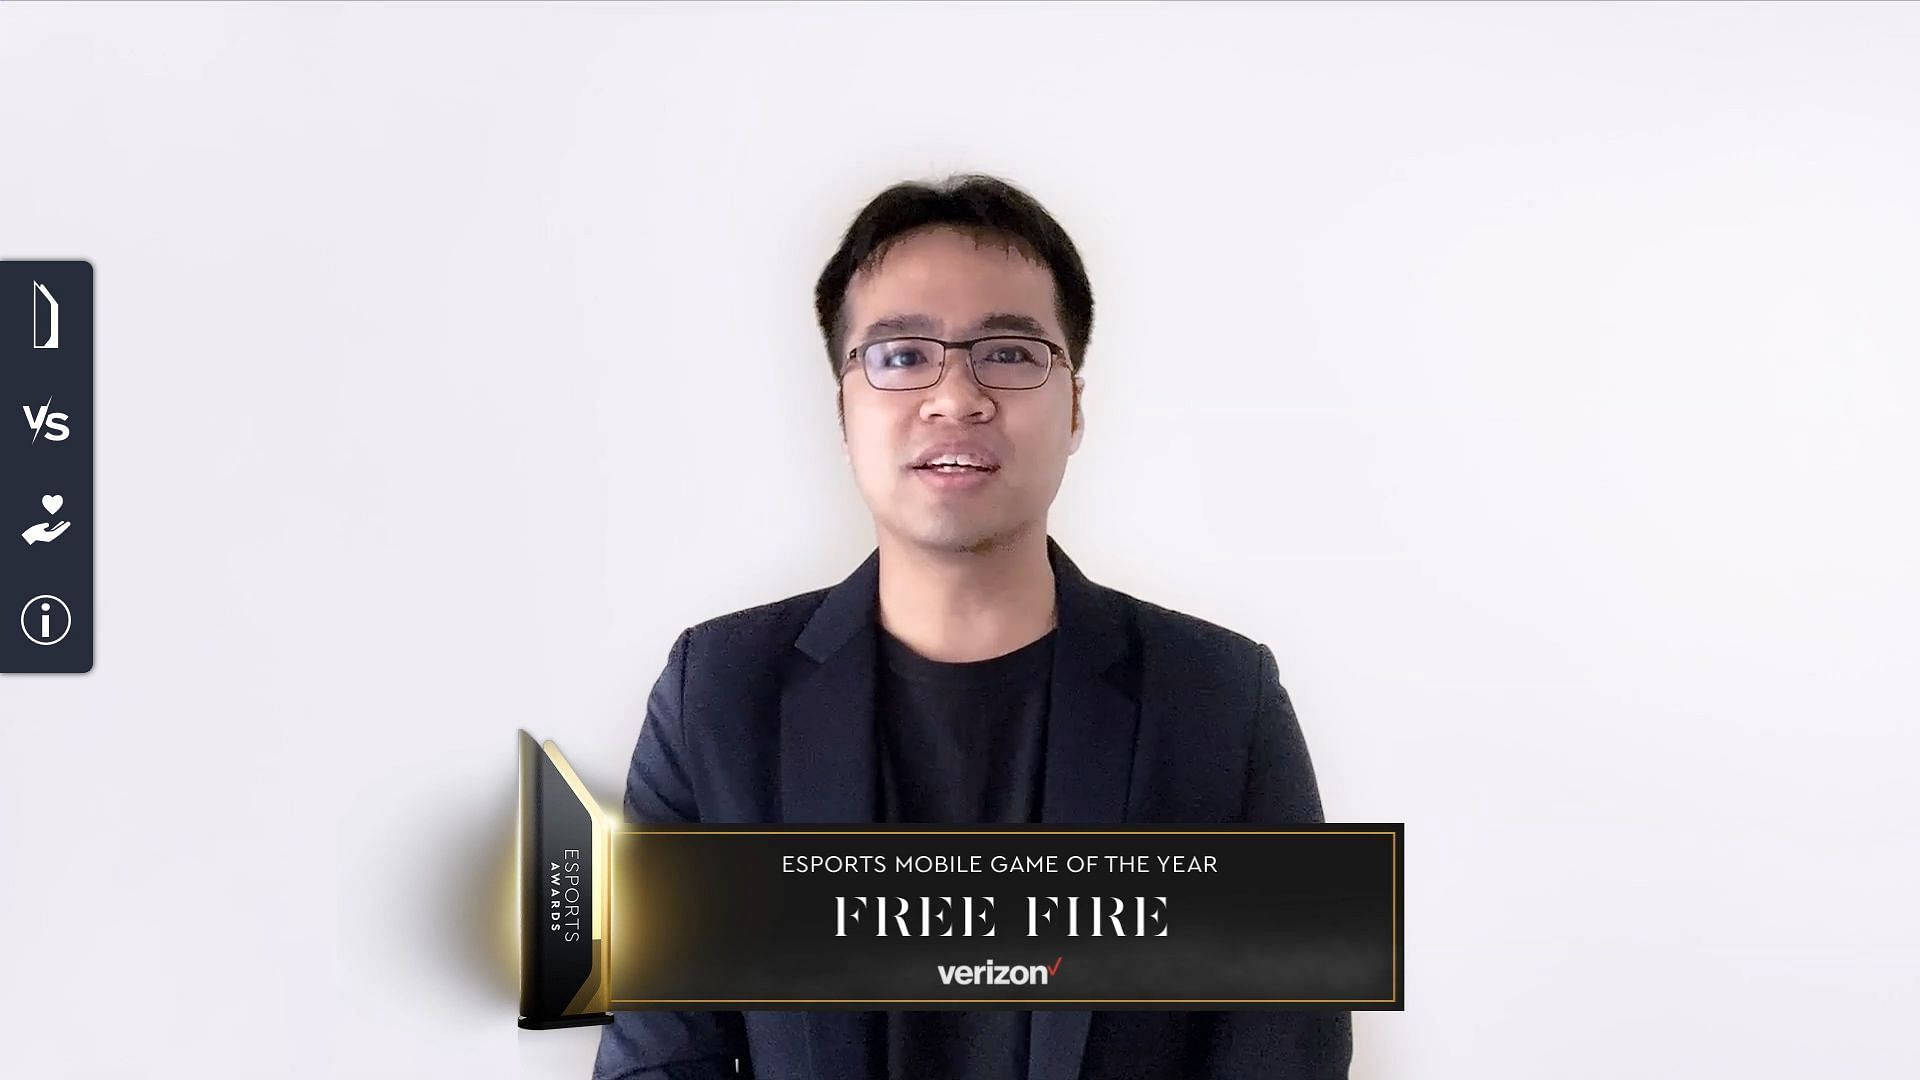 Free Fire developer thanks fans for their support (Image via Esports Awards 2021)